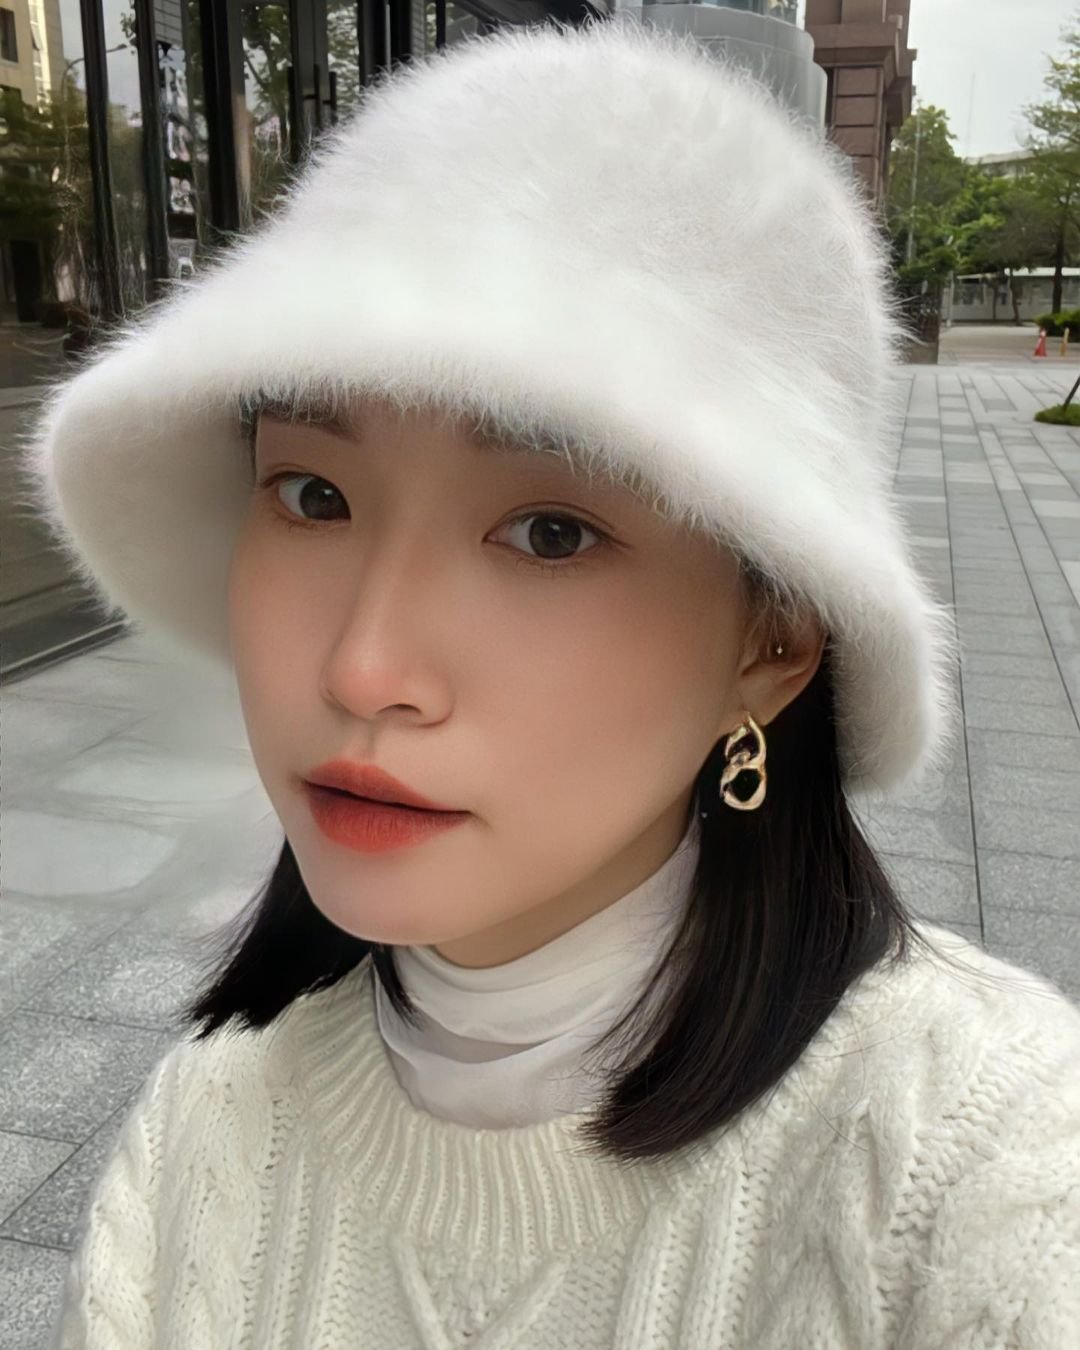 My name is Susan and I am 31 years old. Nice to meet you. I am from Taiwan and now I am in Seoul    https://t.co/ZojHOMpOmH